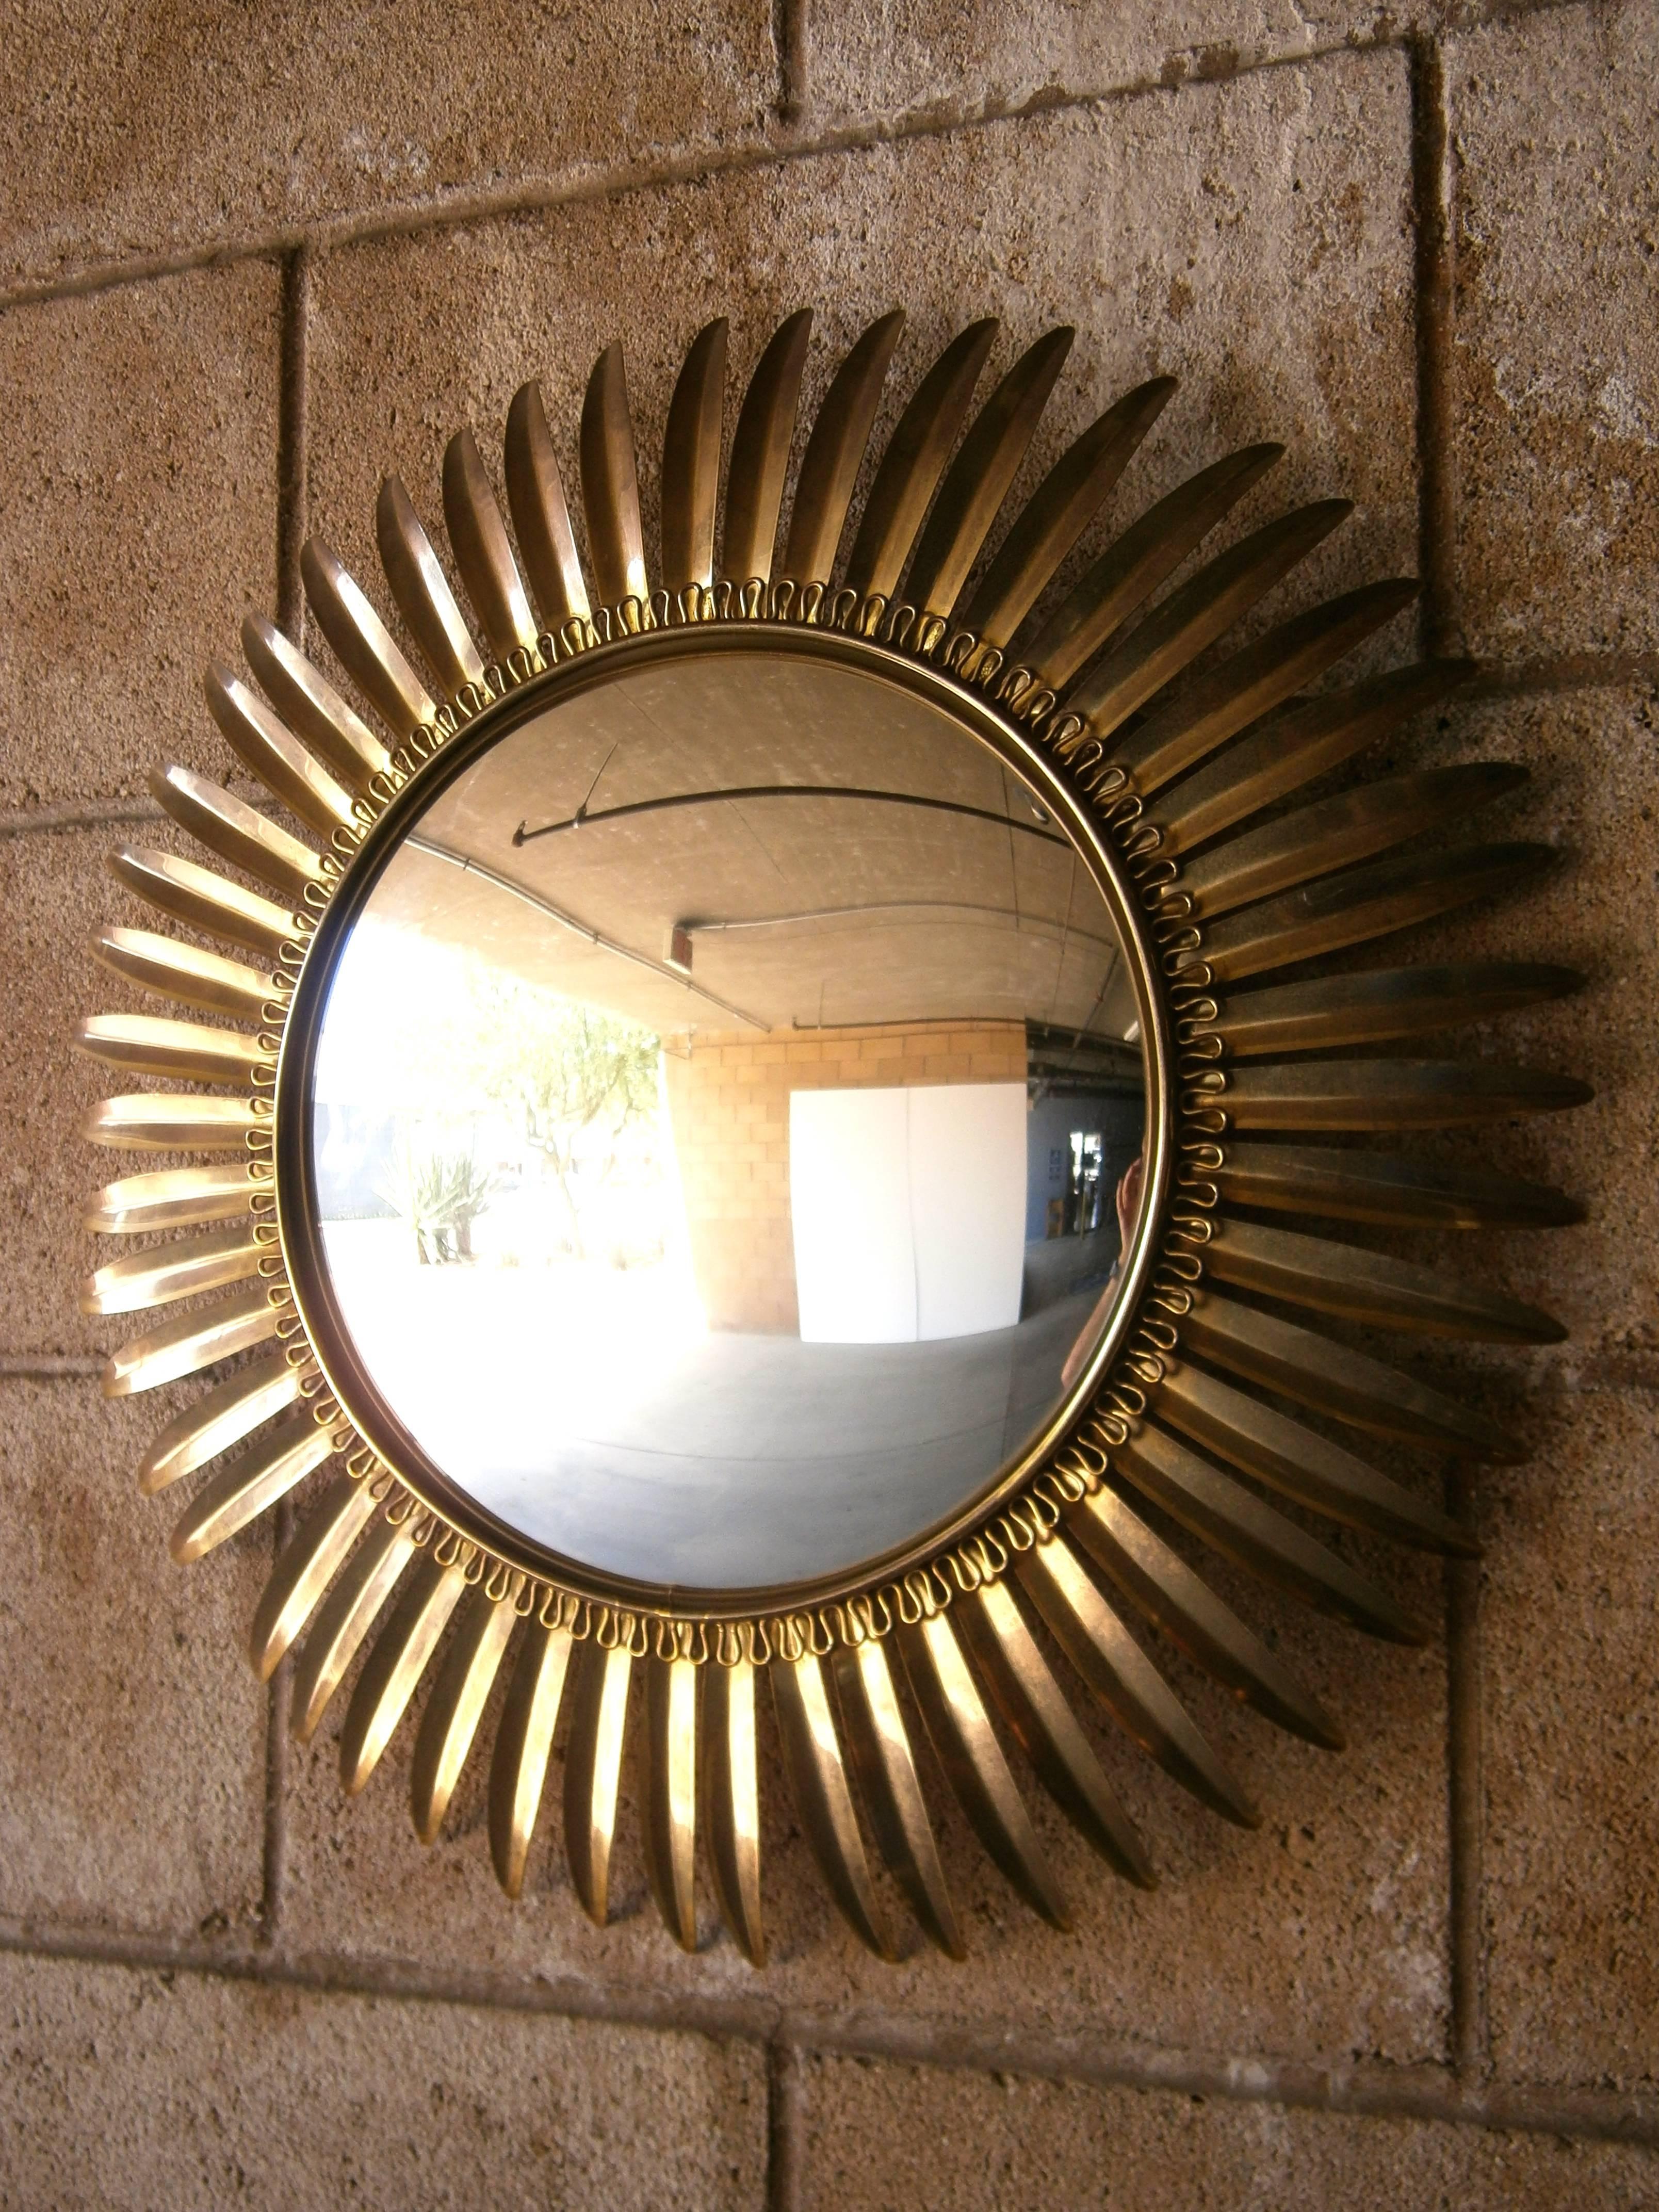 A beautiful and sophisticated Italian mid-century convex Sunflower mirror in brass c. 1960's.